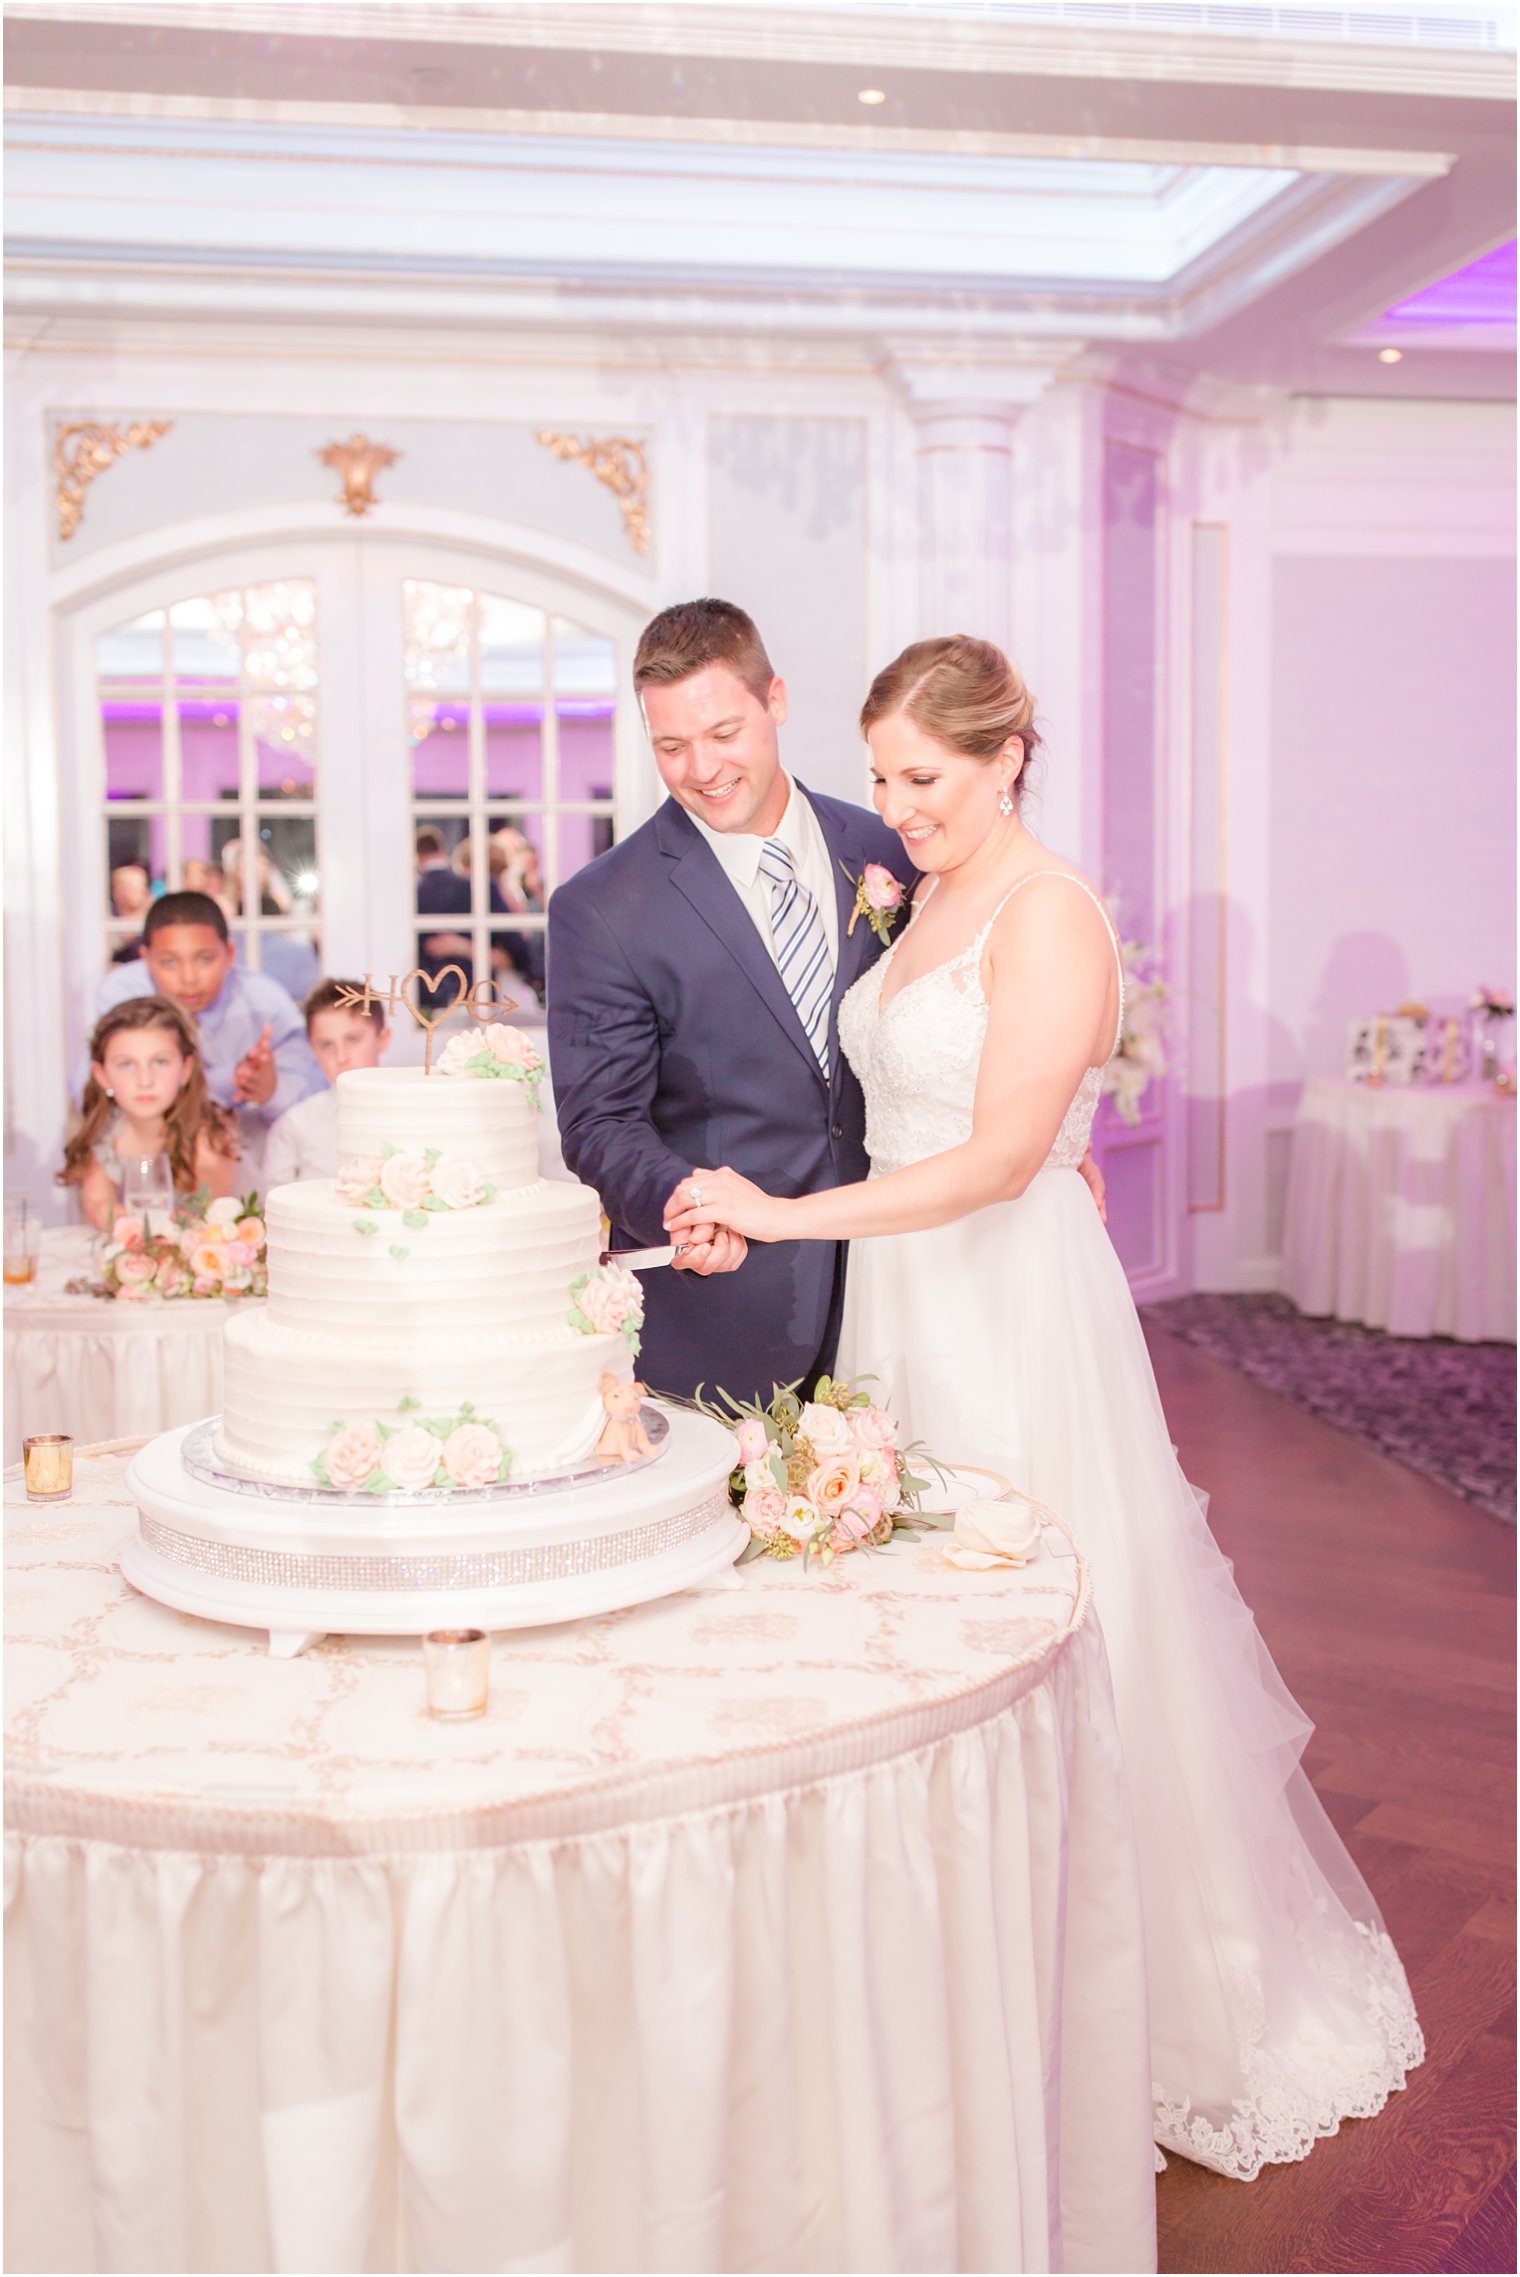 Bride and groom cutting cake during wedding reception at The Mill at Lakeside Manor in Spring Lake NJ